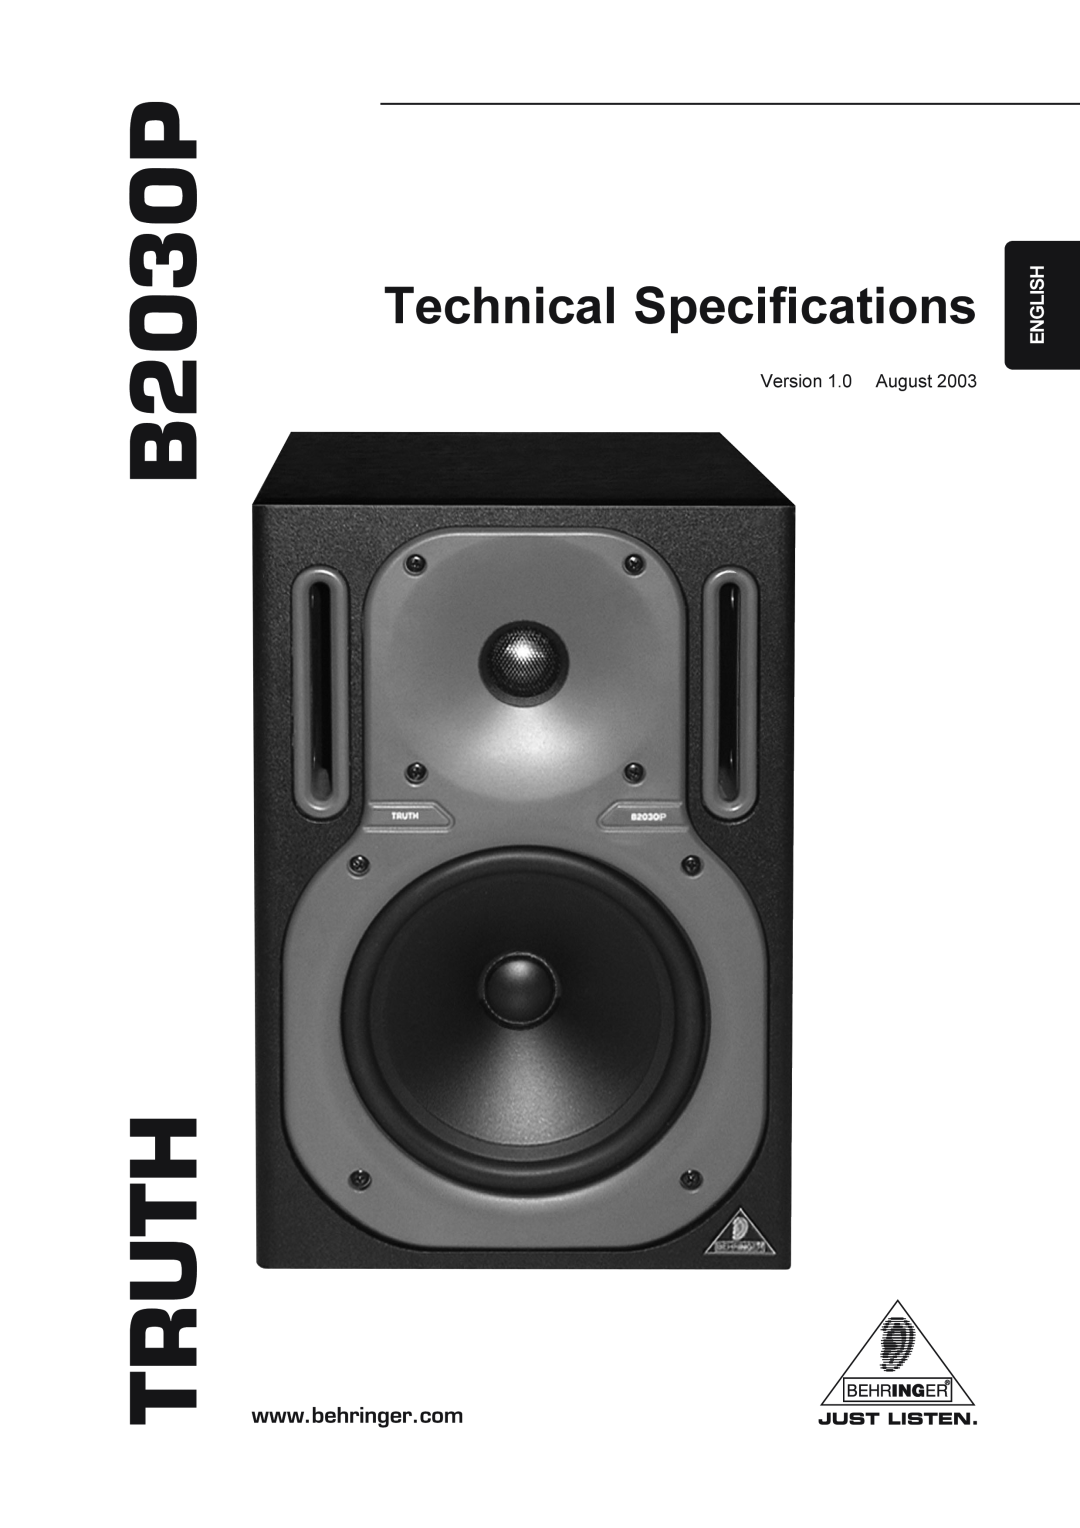 Behringer technical specifications B2030P TRUTH, Technical Specifications, English 